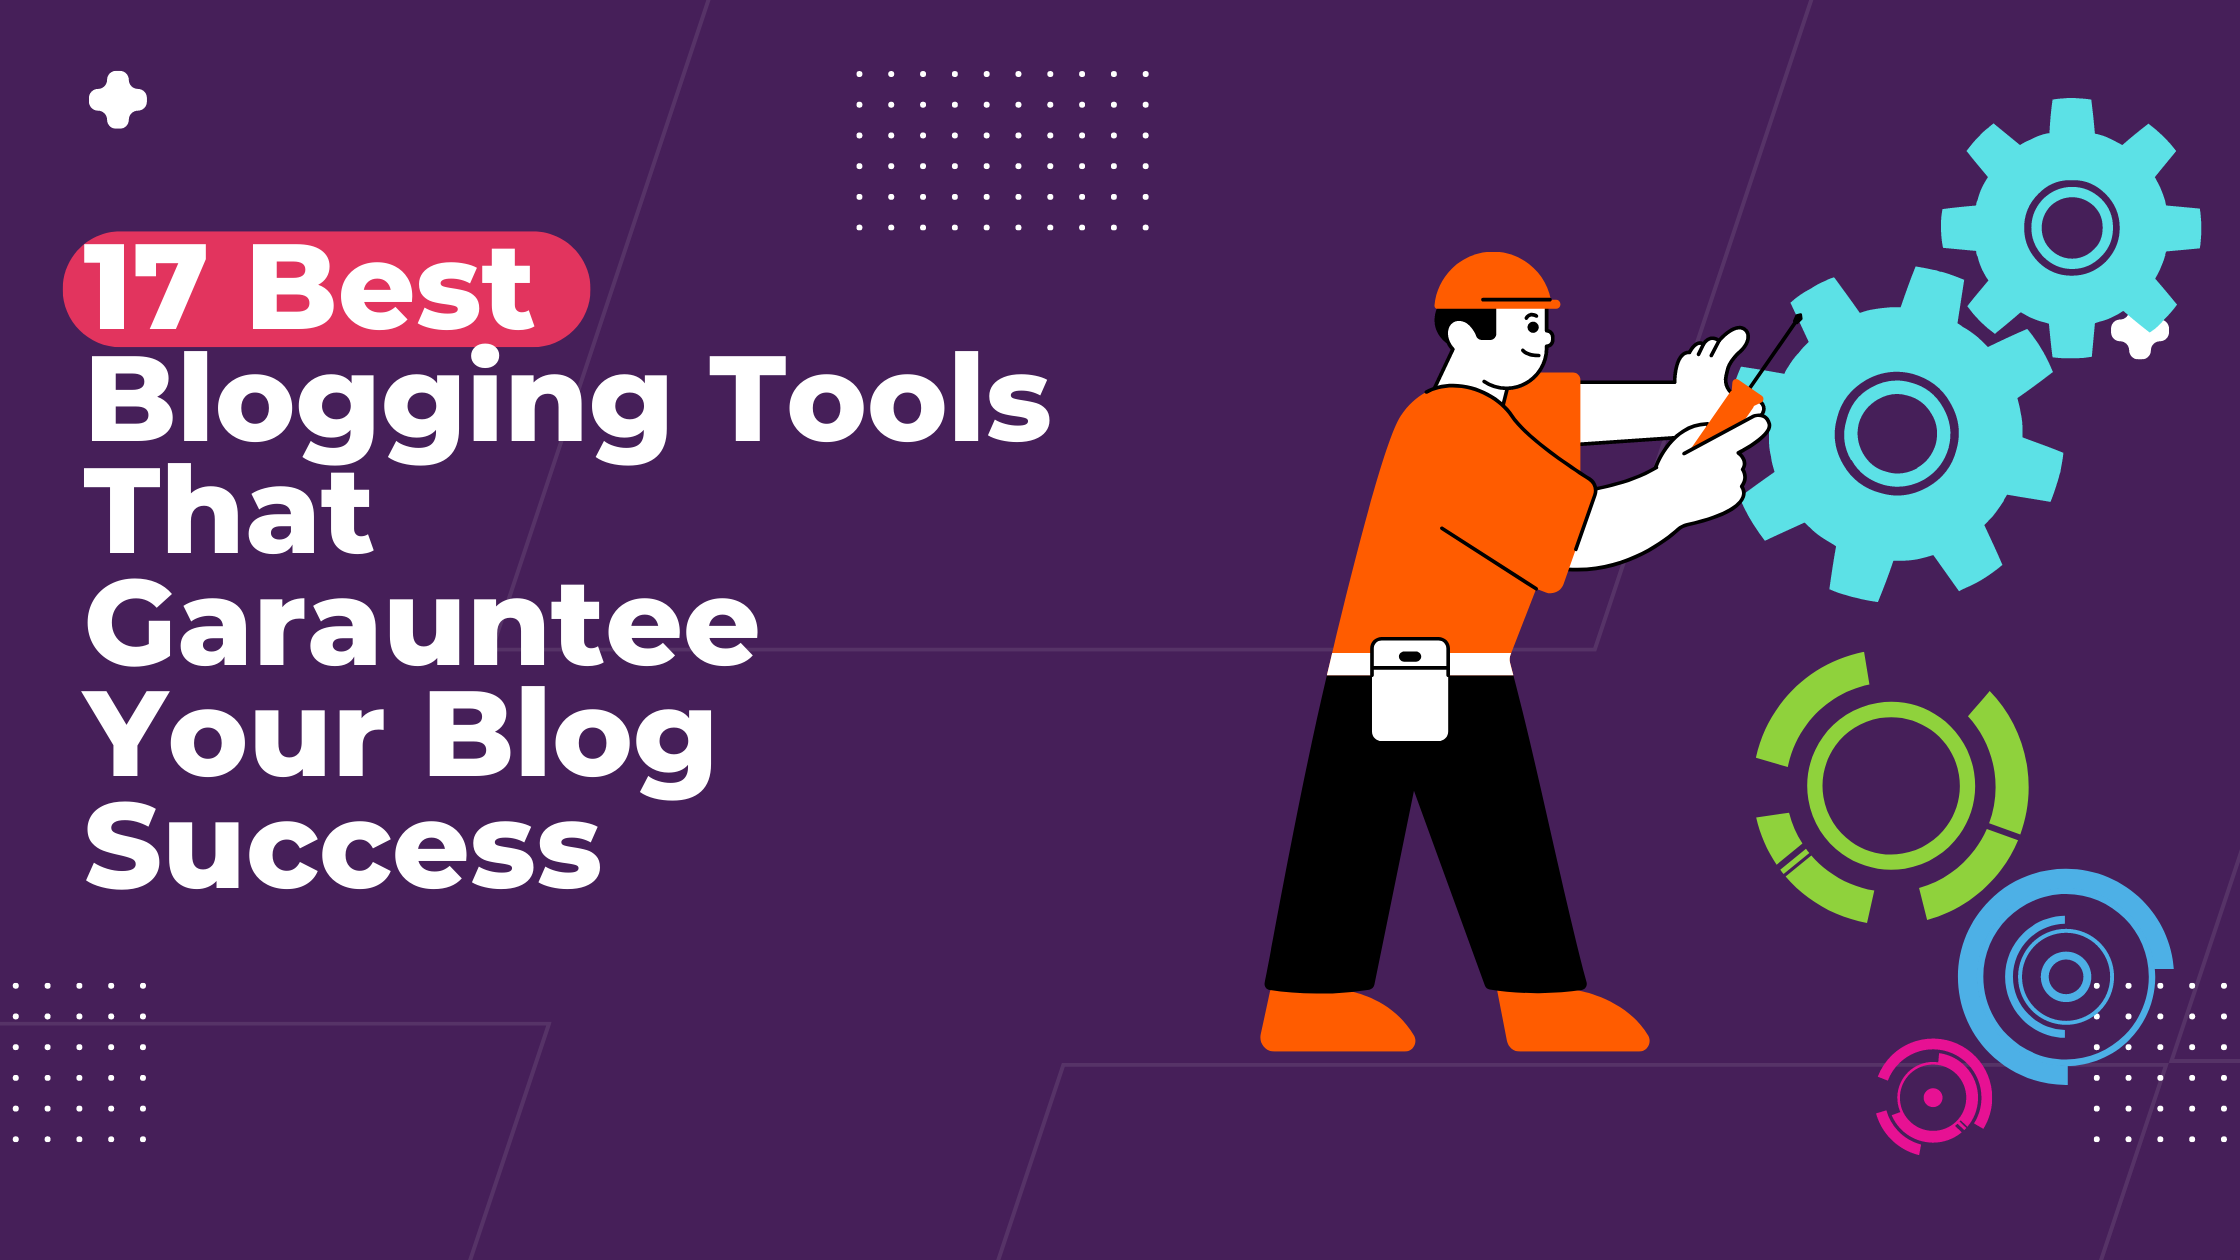 19 Best Online Tools That Improves Your Blog Success (Tested & Reviewed)